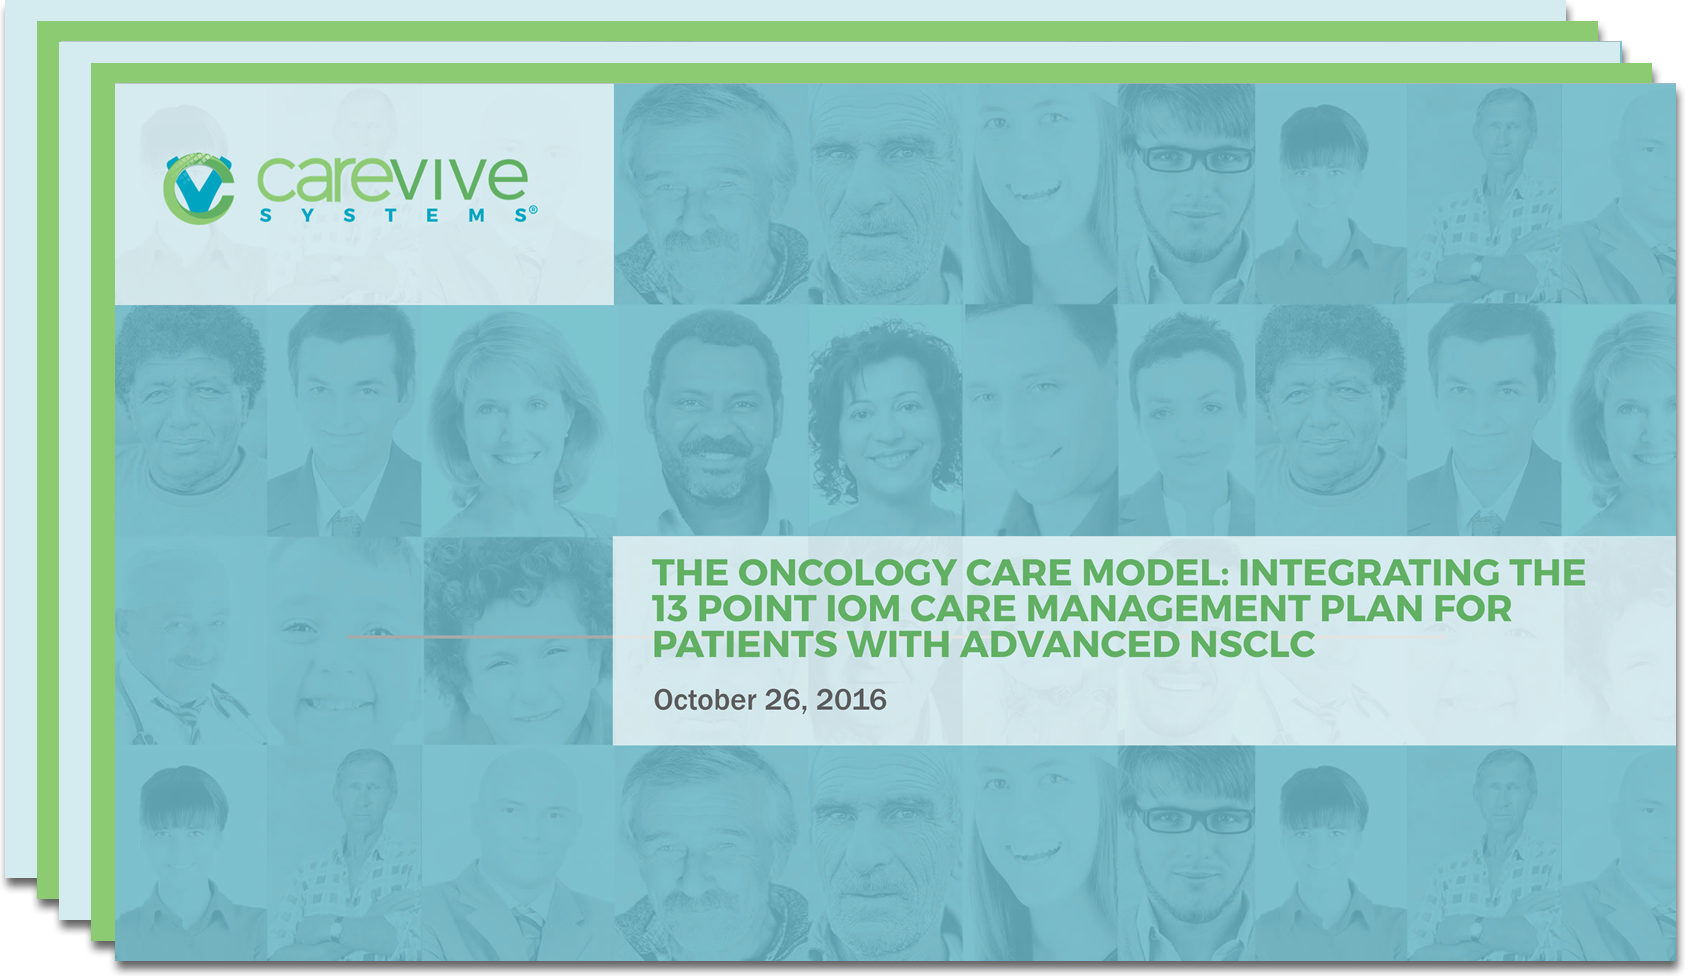 The Oncology Care Model: Integrating the 13 Point IOM Care Management Plan for Patients With Advanced NSCLC